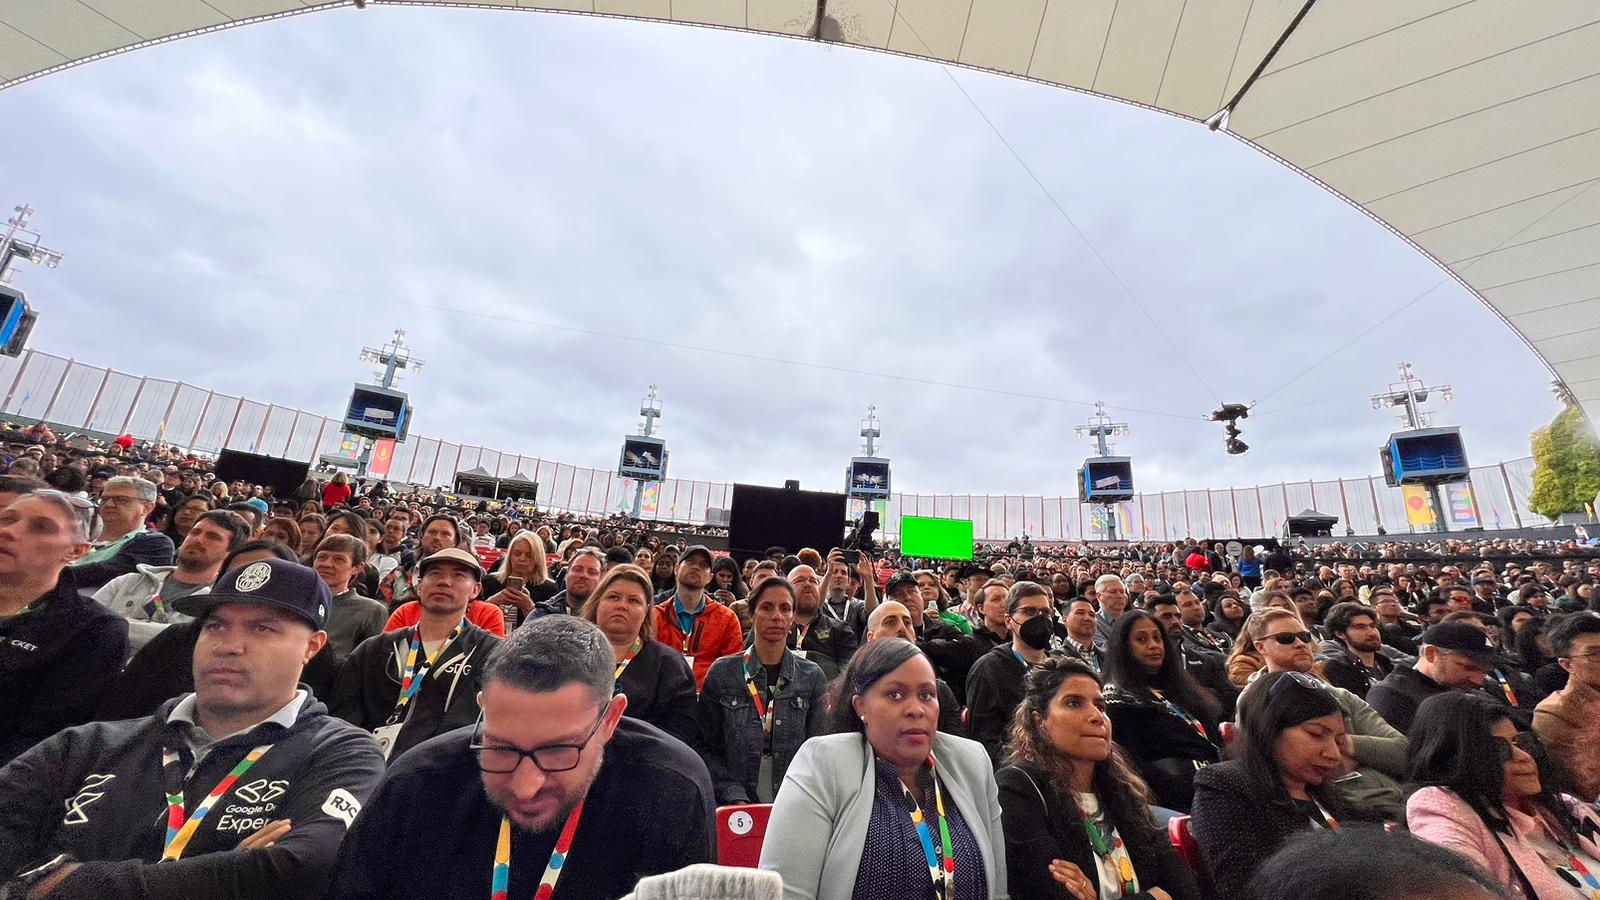 Audience at the Google I/O event.